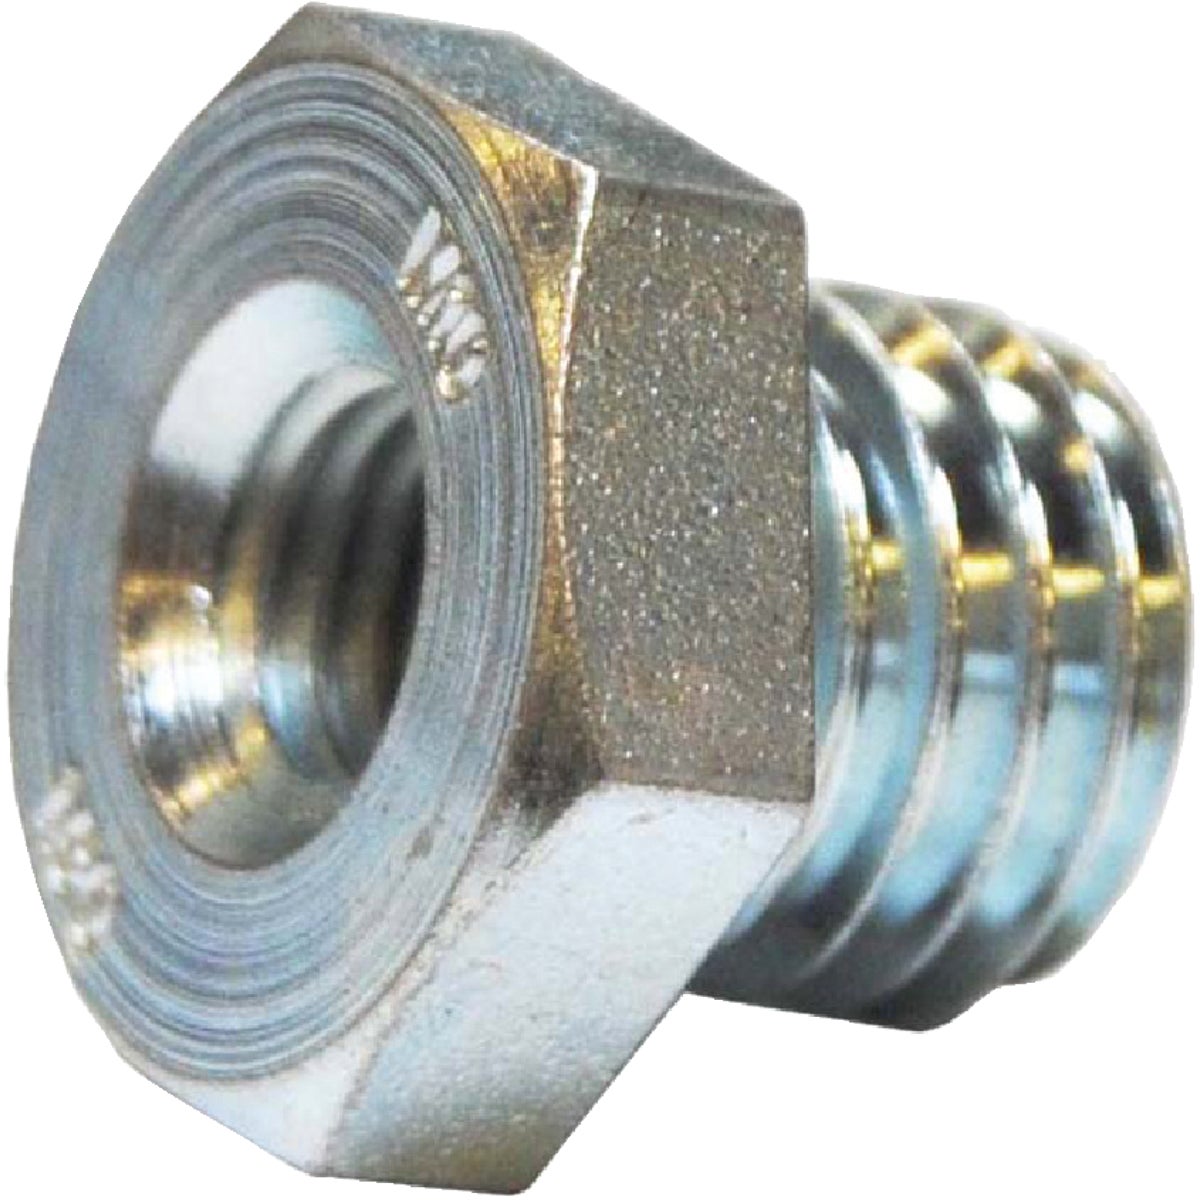 Item 337064, For use with Weiler angle grinder brushes to adapt from 5/8" - 11 UNC to 